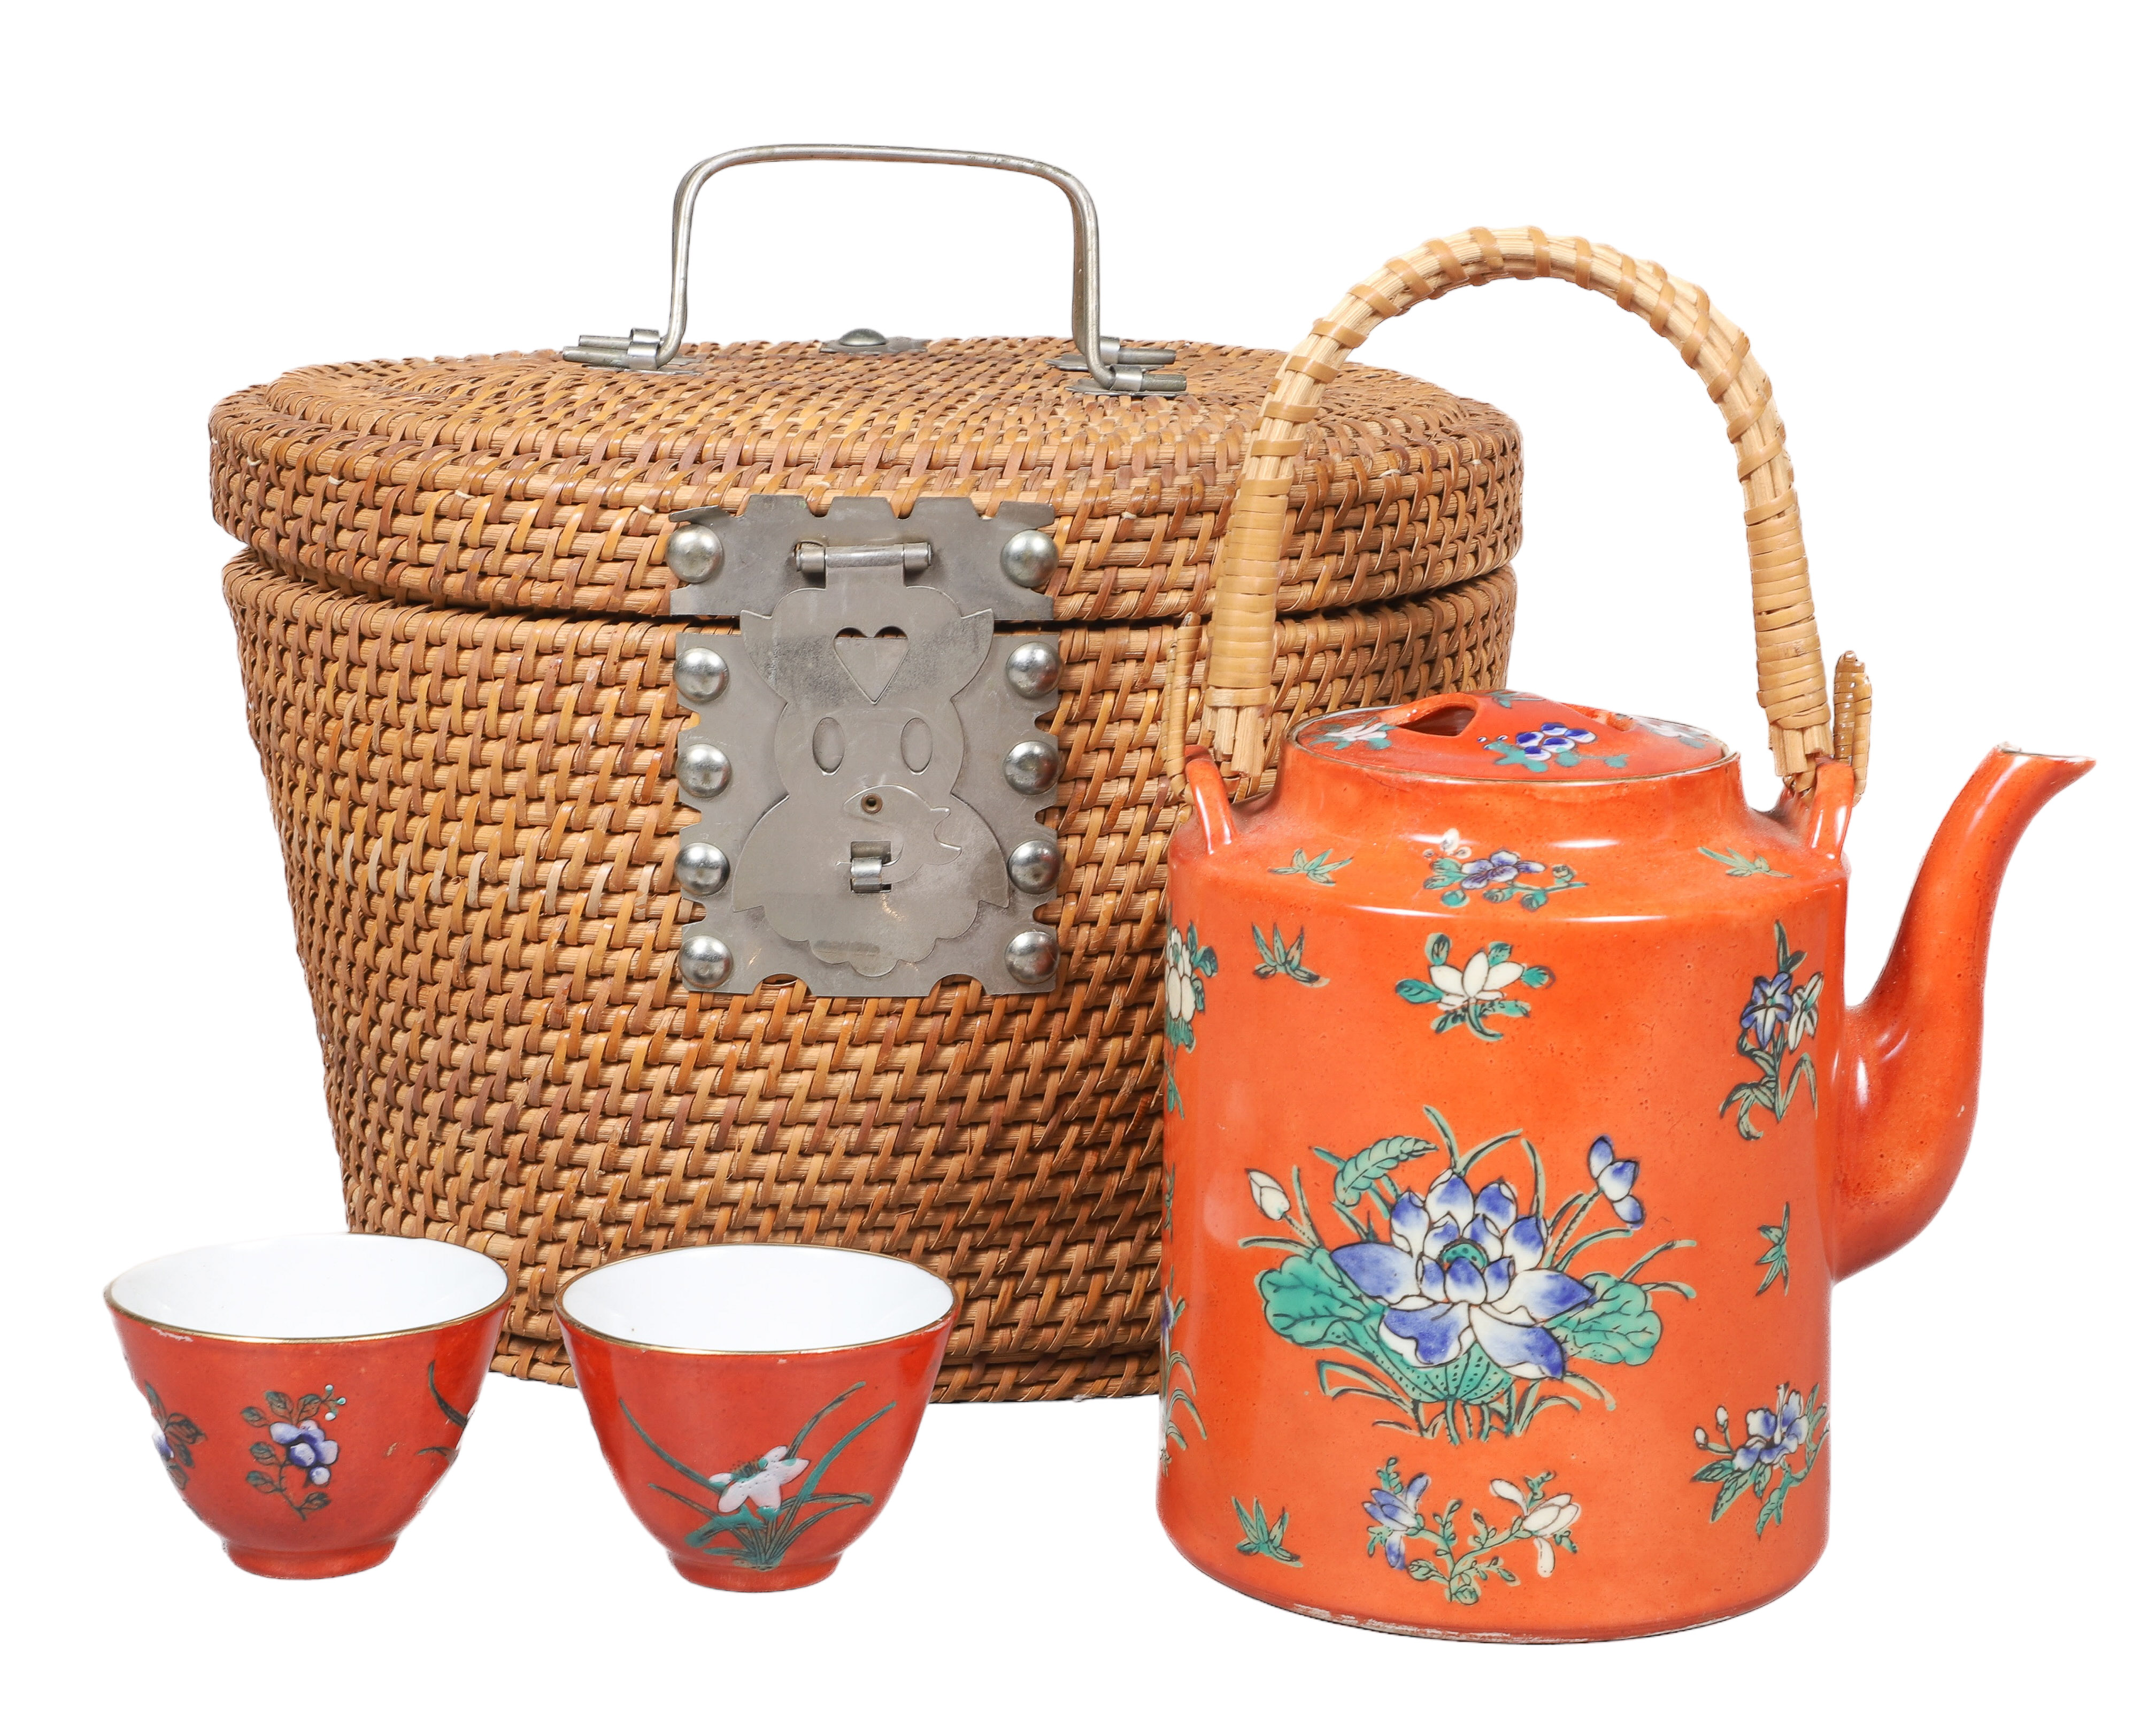 Chinese tea basket, woven basket with